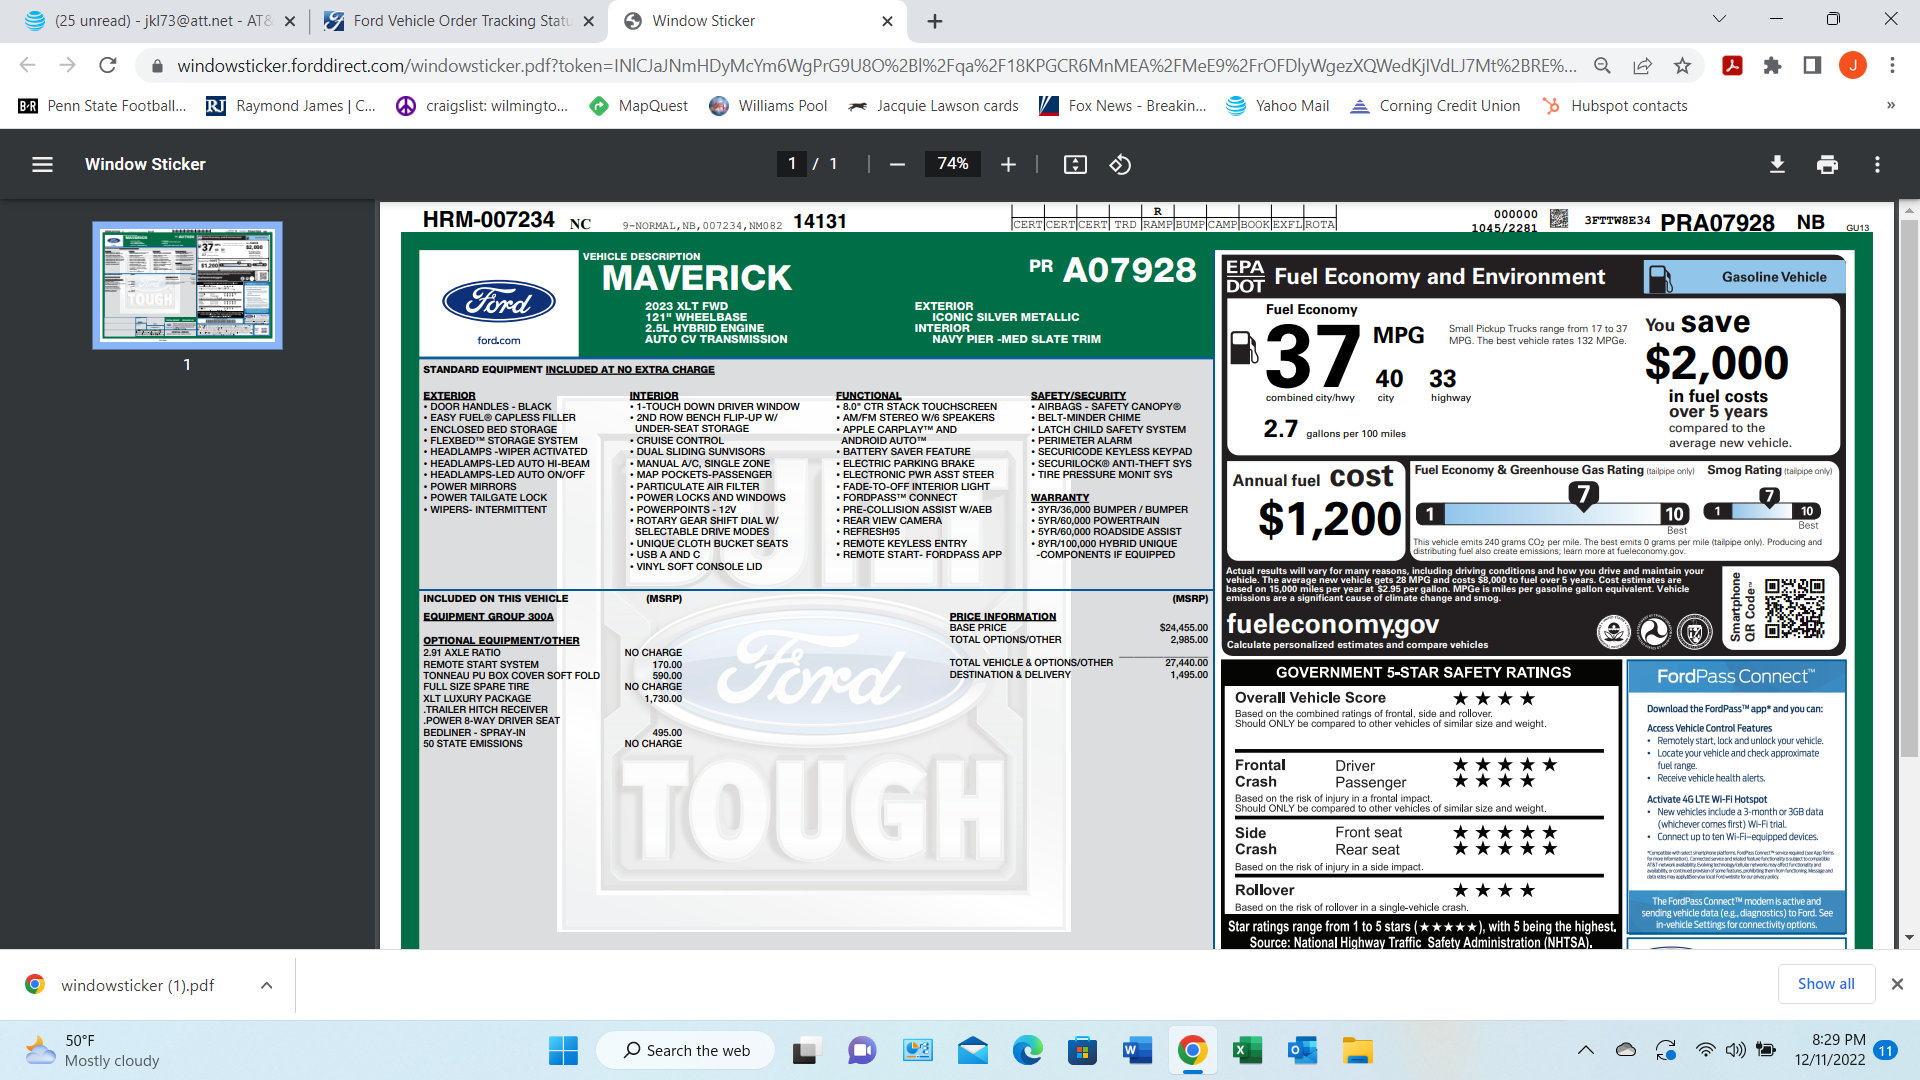 Ford Maverick 2023 Maverick Hybrid Window Sticker Shows Lower MPG Than 2022 Model (city mileage went from 42 to 40 MPG) 1670810378036